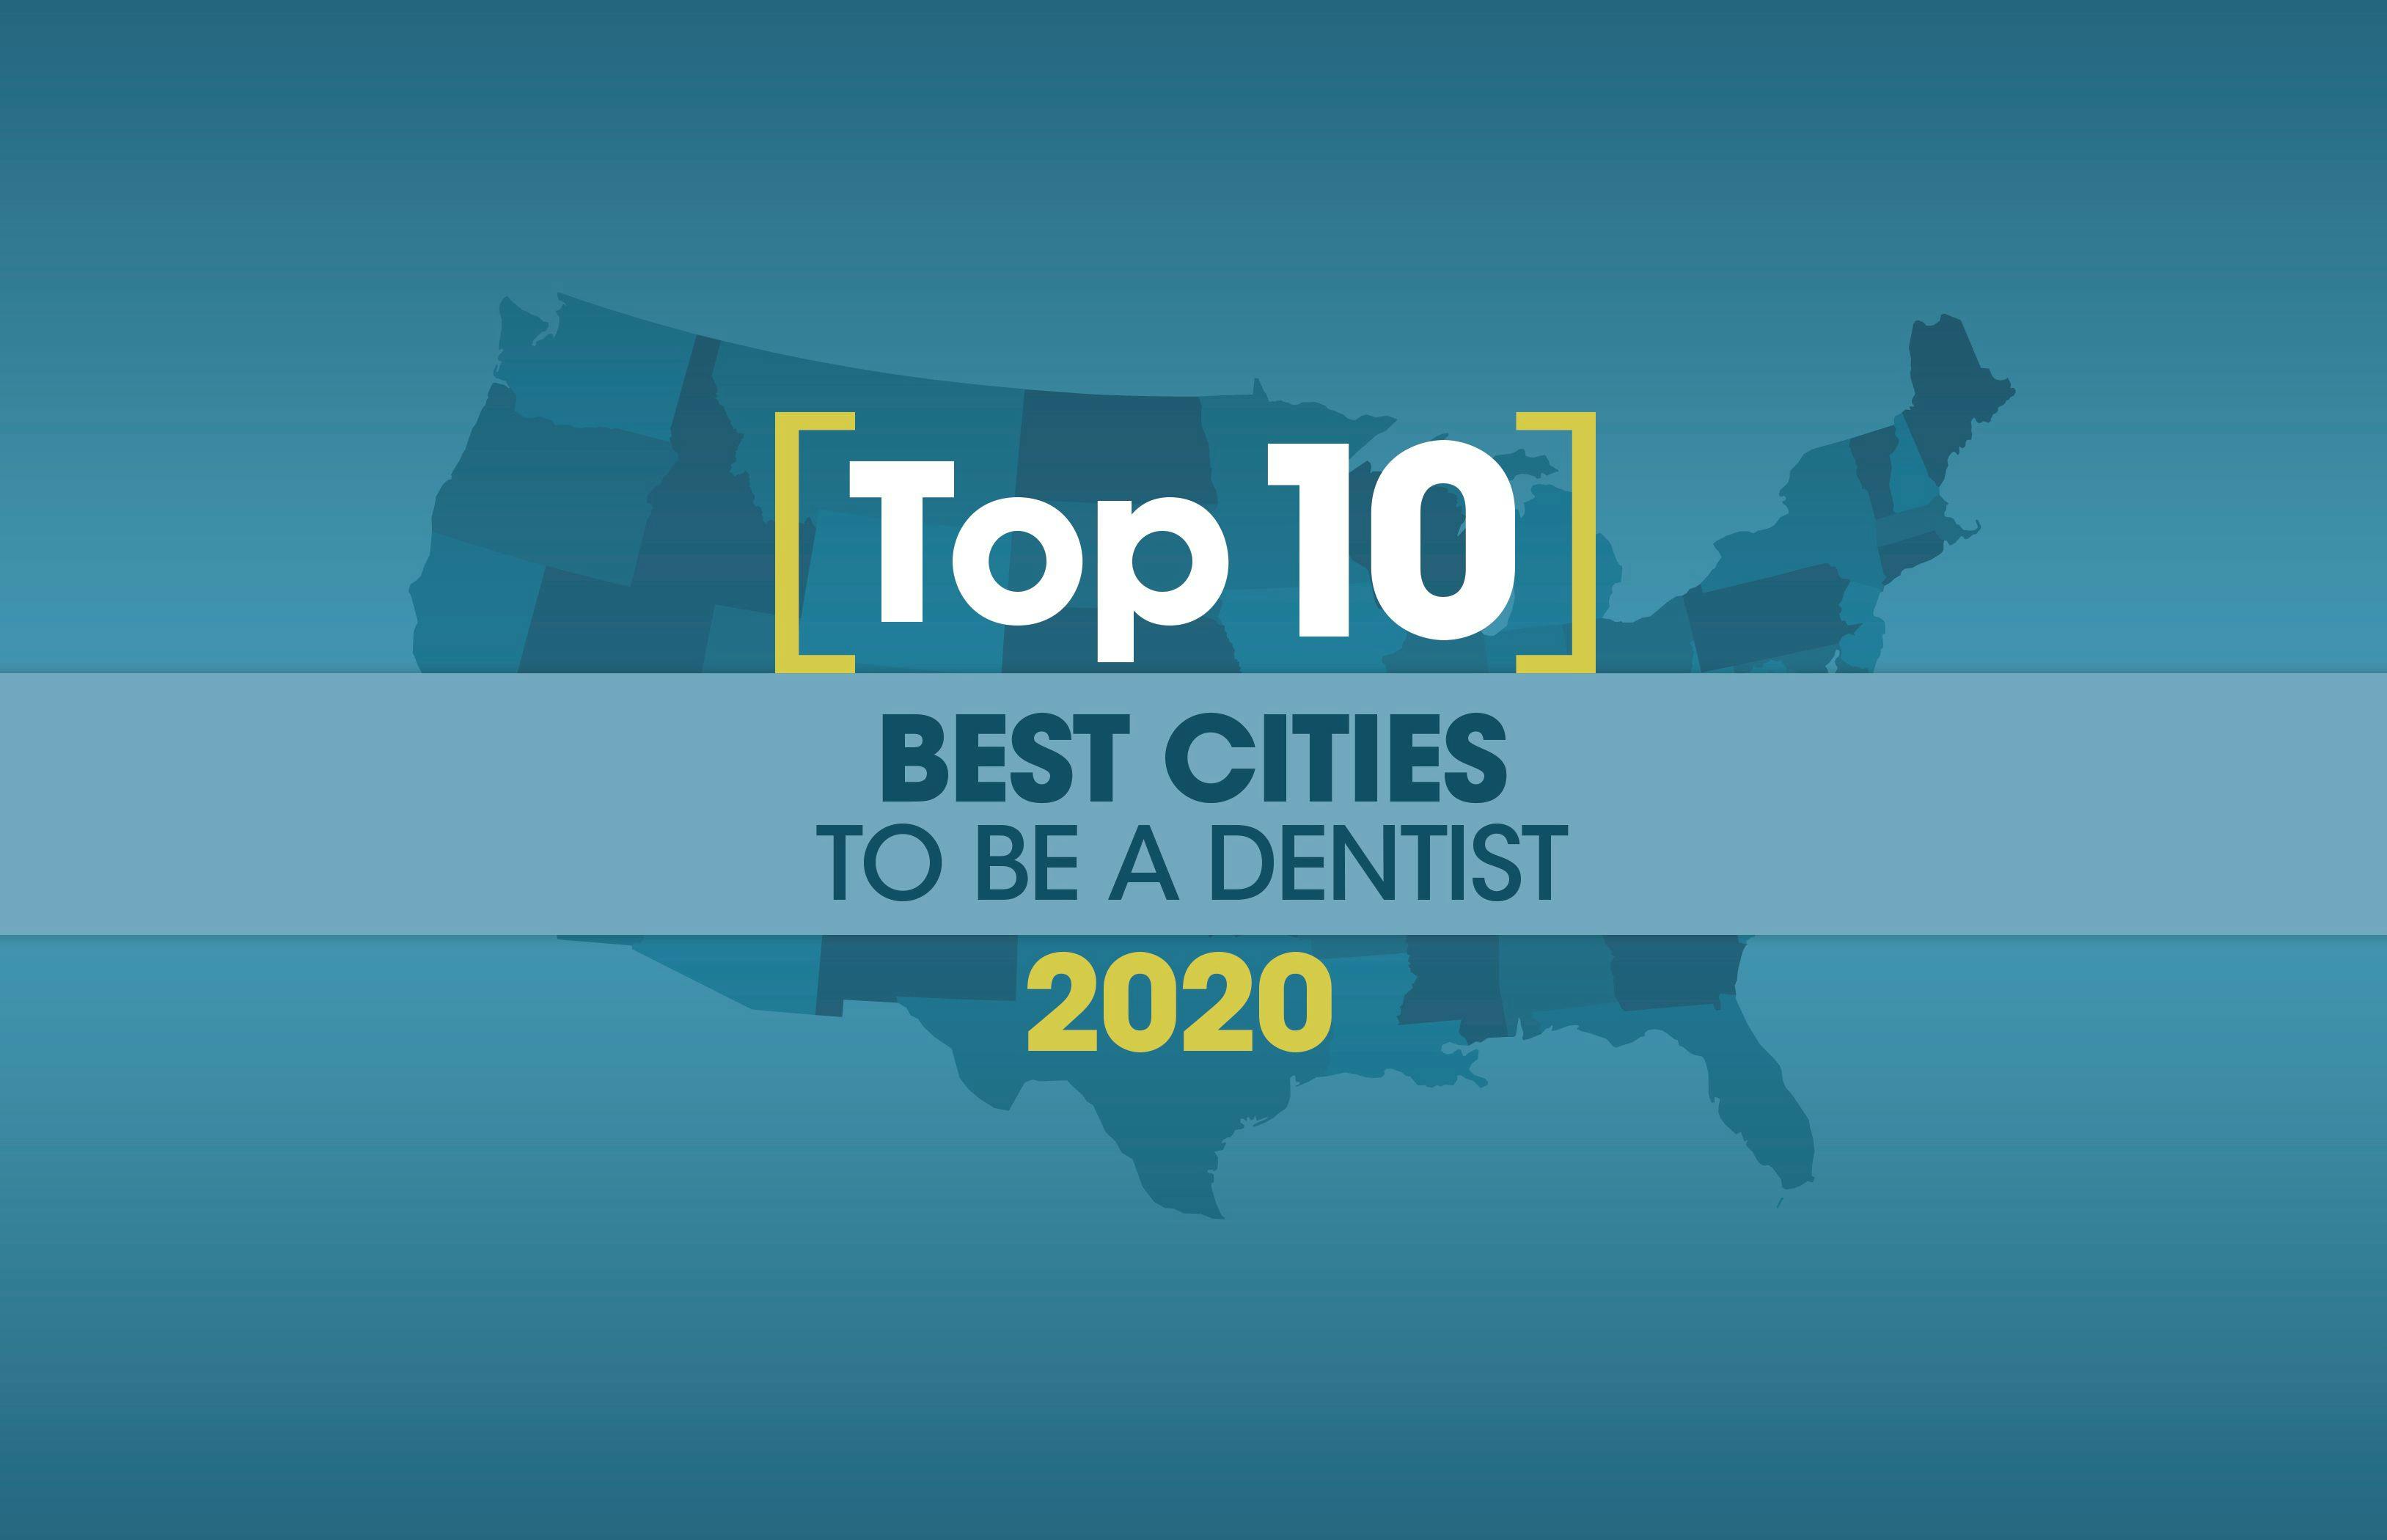 Top 10 Best Cities to be a Dentist 2020